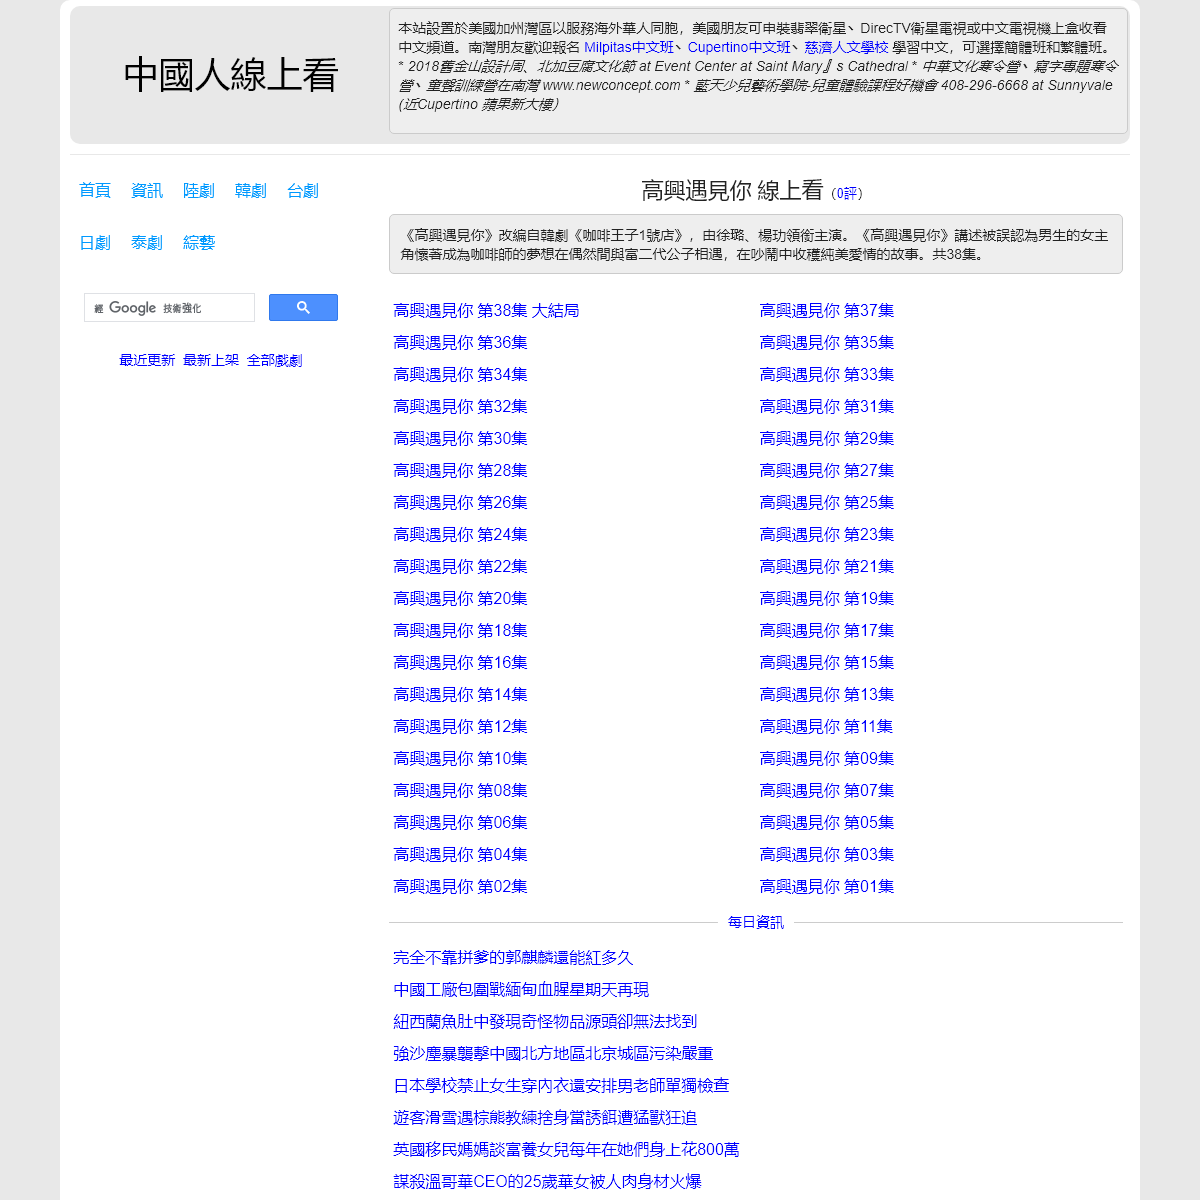 A complete backup of https://chinaq.tv/cn180829/